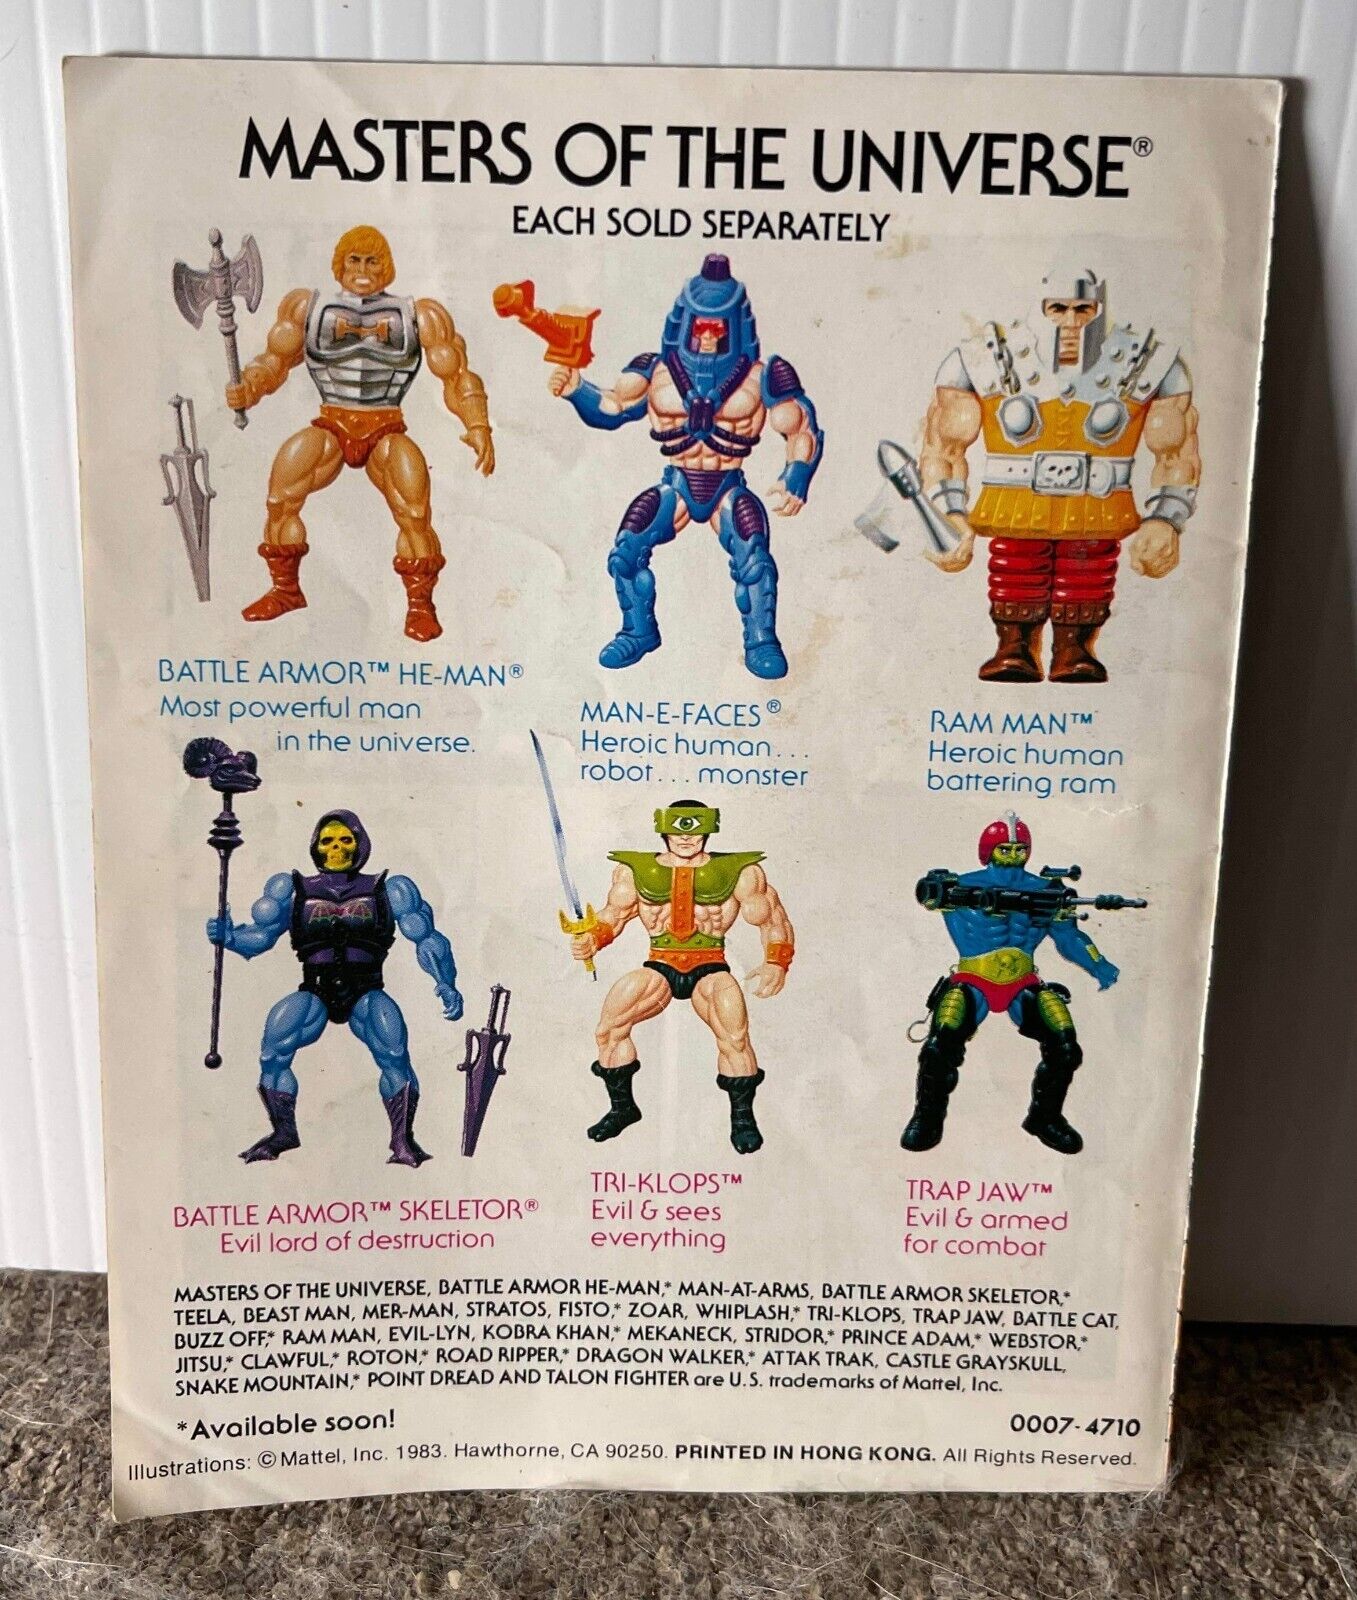 Masters Of The Universe He-Man Vs Skeletor In The Temple of Darkness Mini-Comic